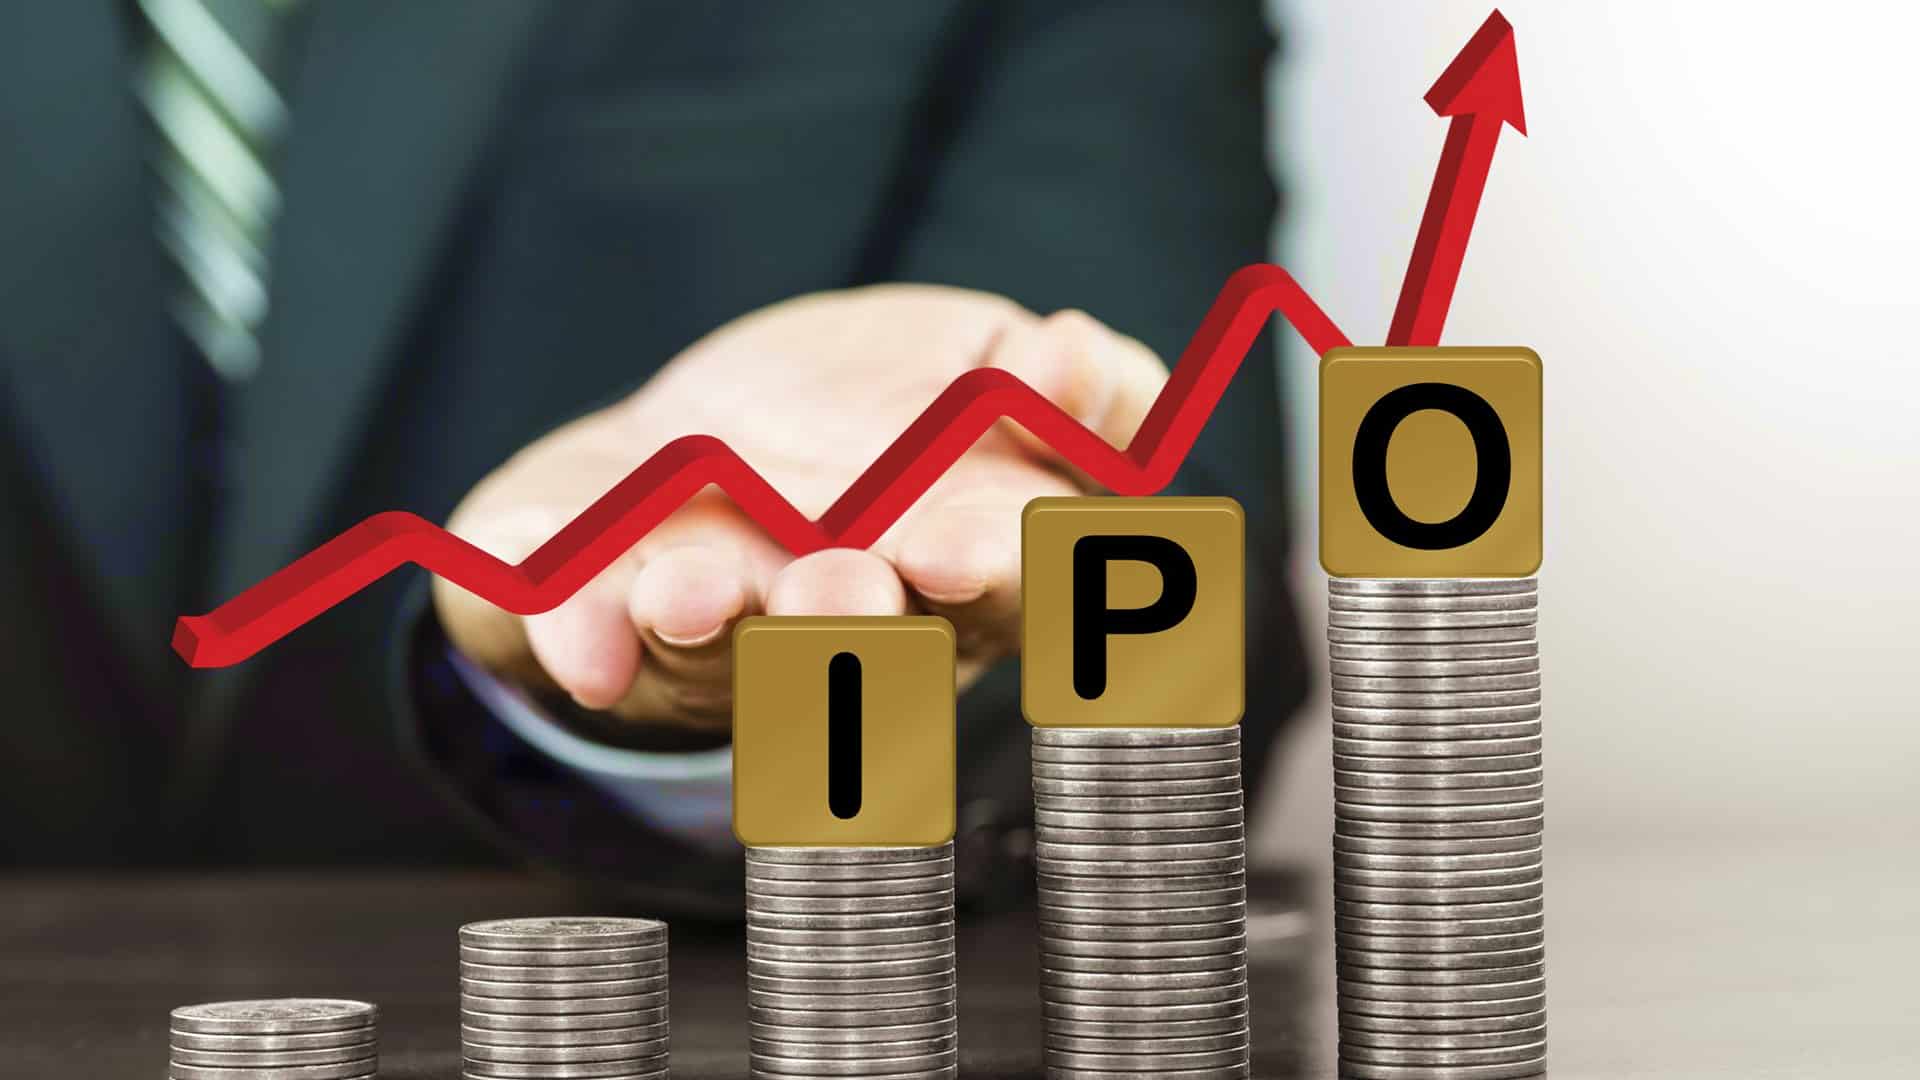 Sai Silks files IPO draft papers with Sebi; eyes up to Rs 1,200 cr